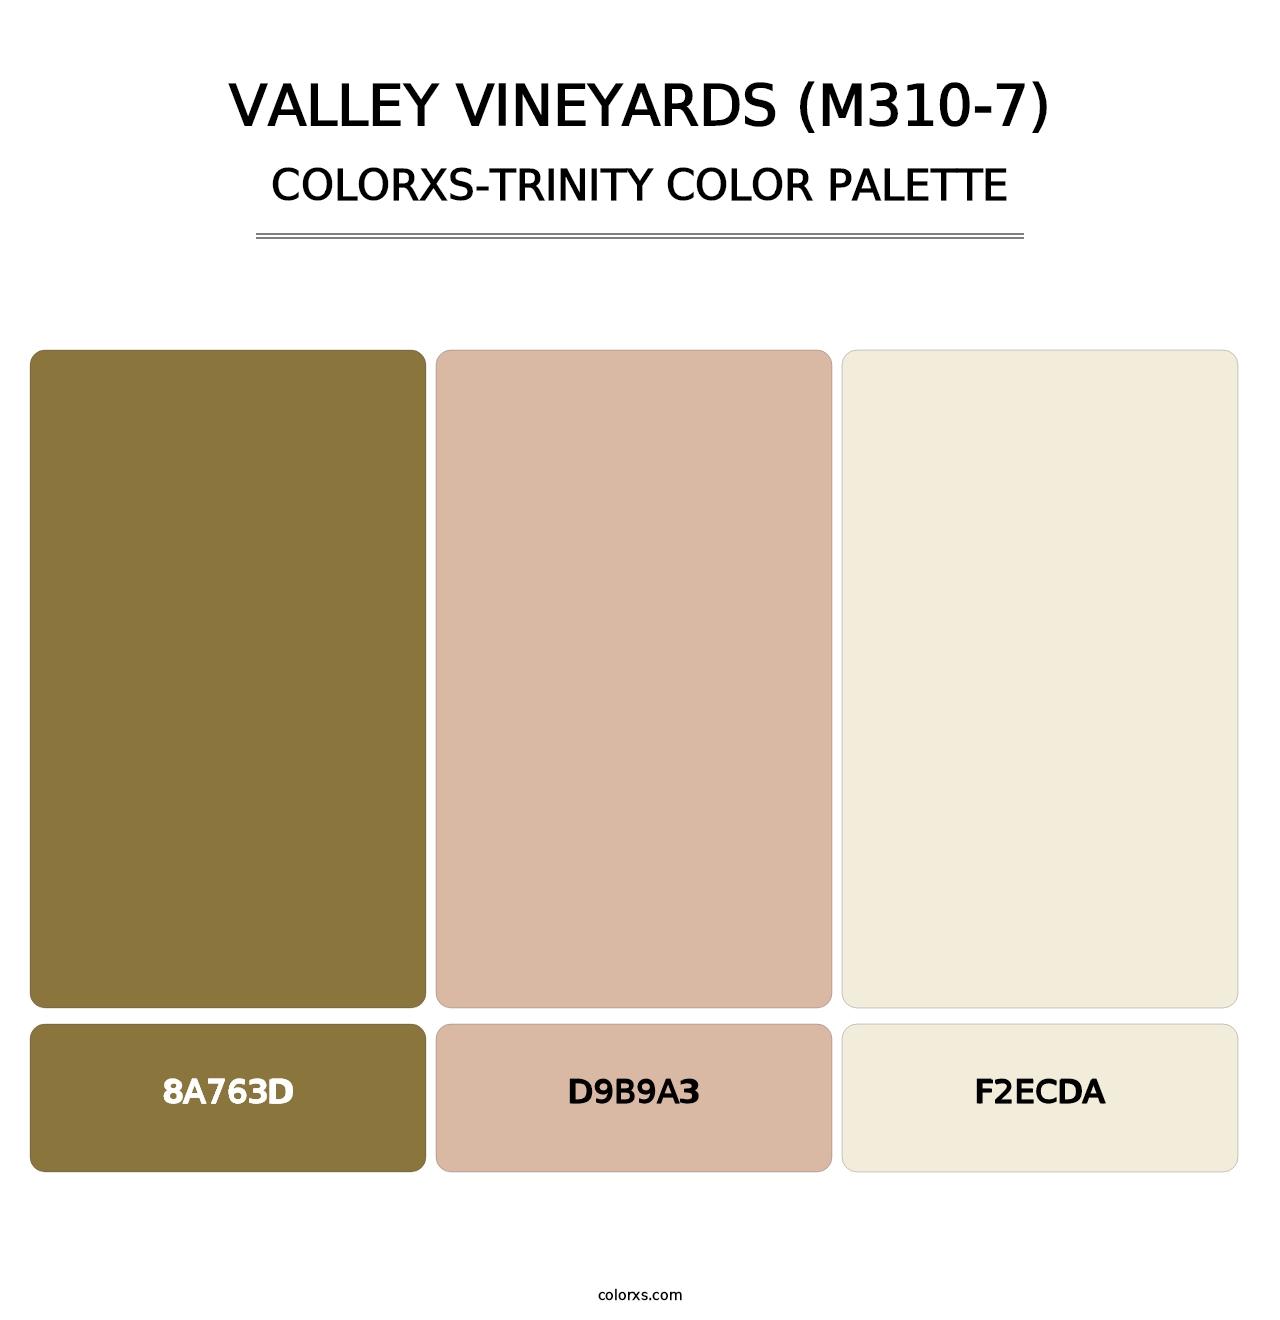 Valley Vineyards (M310-7) - Colorxs Trinity Palette